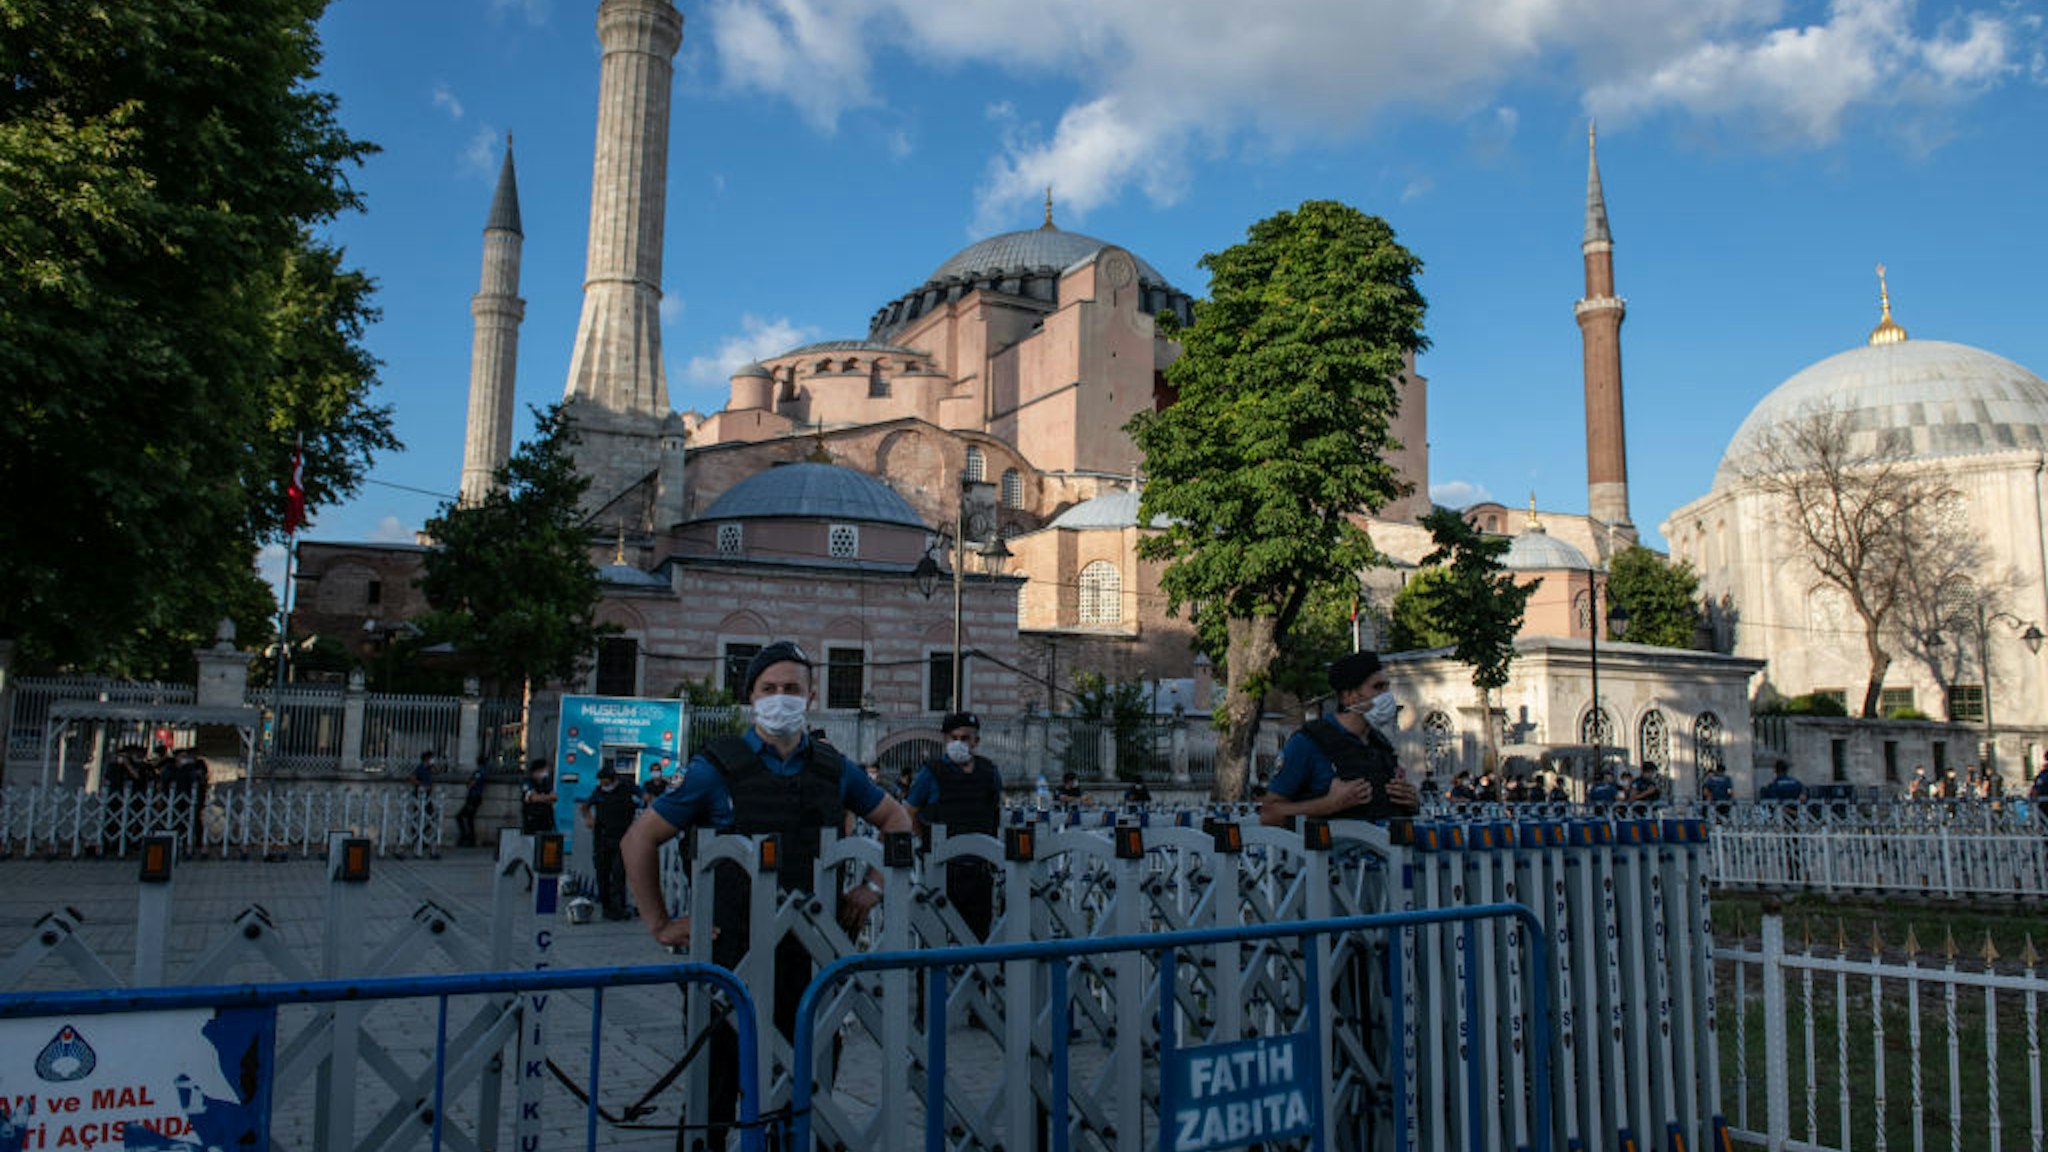 ISTANBUL, TURKEY - JULY 10: Police officers stand guard outside Istanbul's famous Hagia Sophia on July 10, 2020 in Istanbul, Turkey. Turkey's top administrative court ruled to annul a 1934 decree that turned the historic Hagia Sophia into a museum. The controversial ruling opens the way for the structure to be converted back into a mosque after 85 years. President Recep Tayyip Erdoğan handed over the iconic structure’s control to the country’s Religious Affairs Directorate following a court ruling revoking its status as a museum. President Erdogan said that the government will open Istanbul’s Hagia Sophia for worship on July 24. (Photo by Burak Kara/Getty Images)